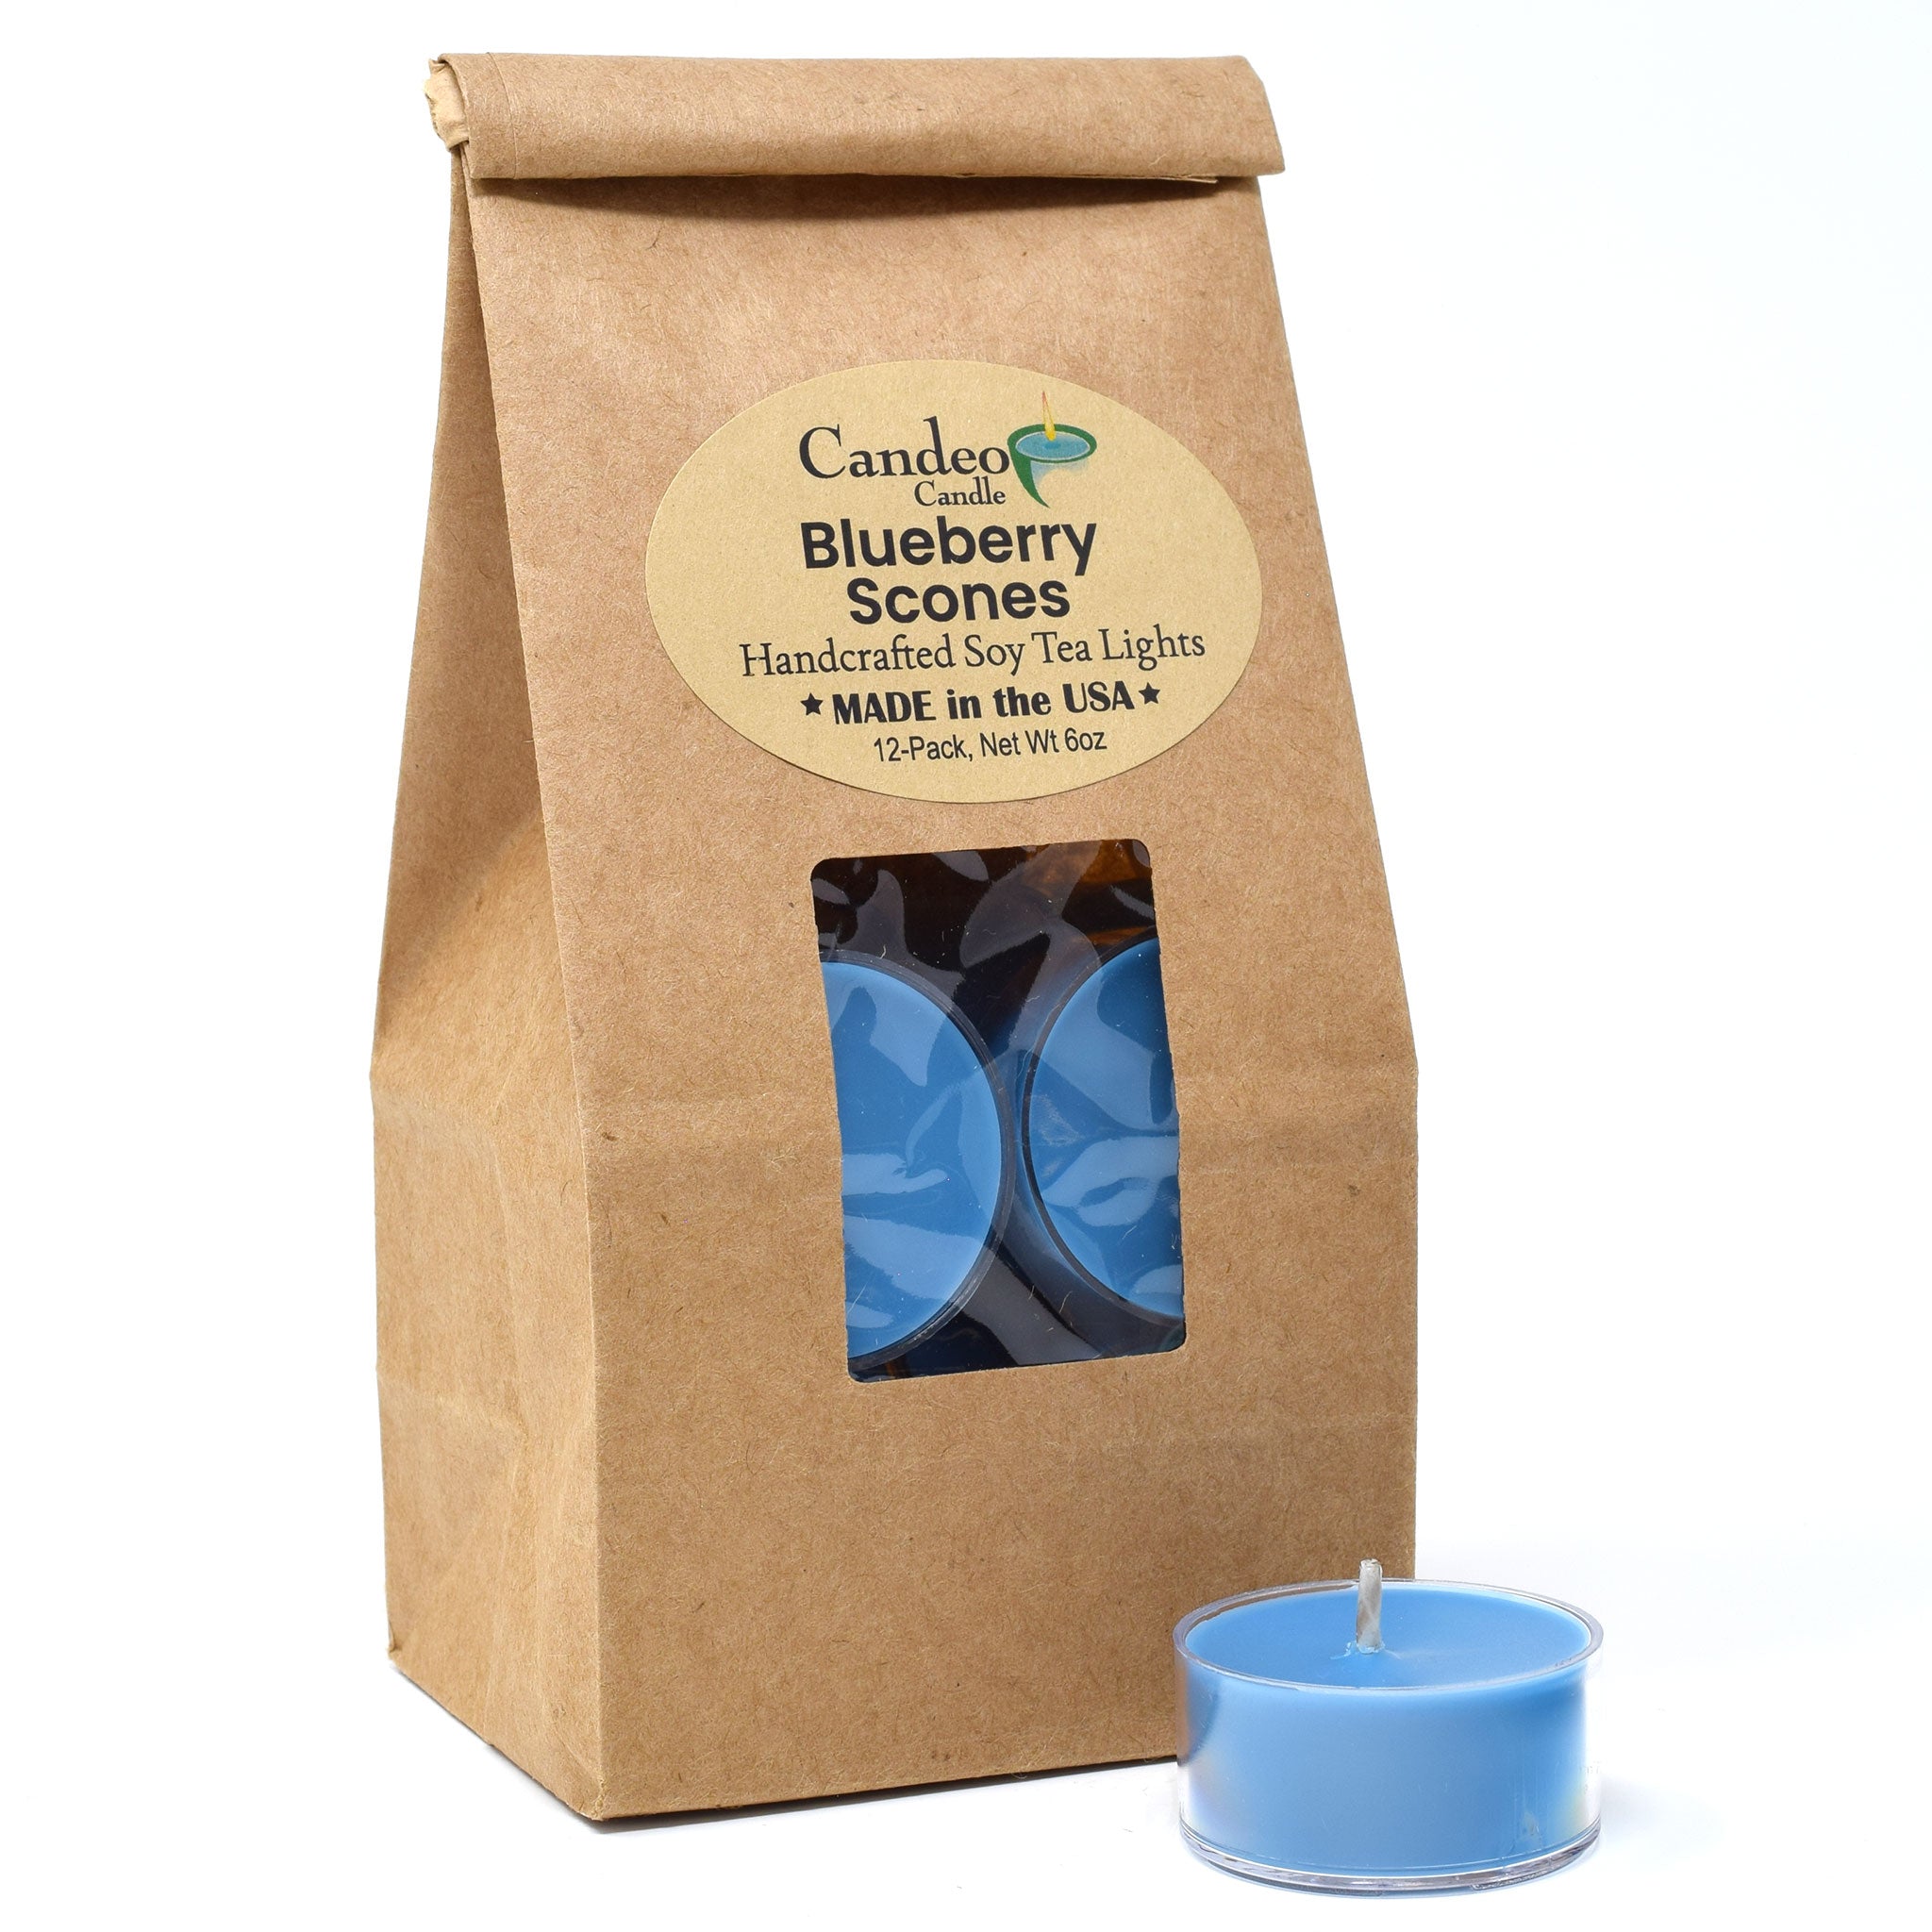 Blueberry Scones, Soy Tea Light 12-Pack - Candeo Candle